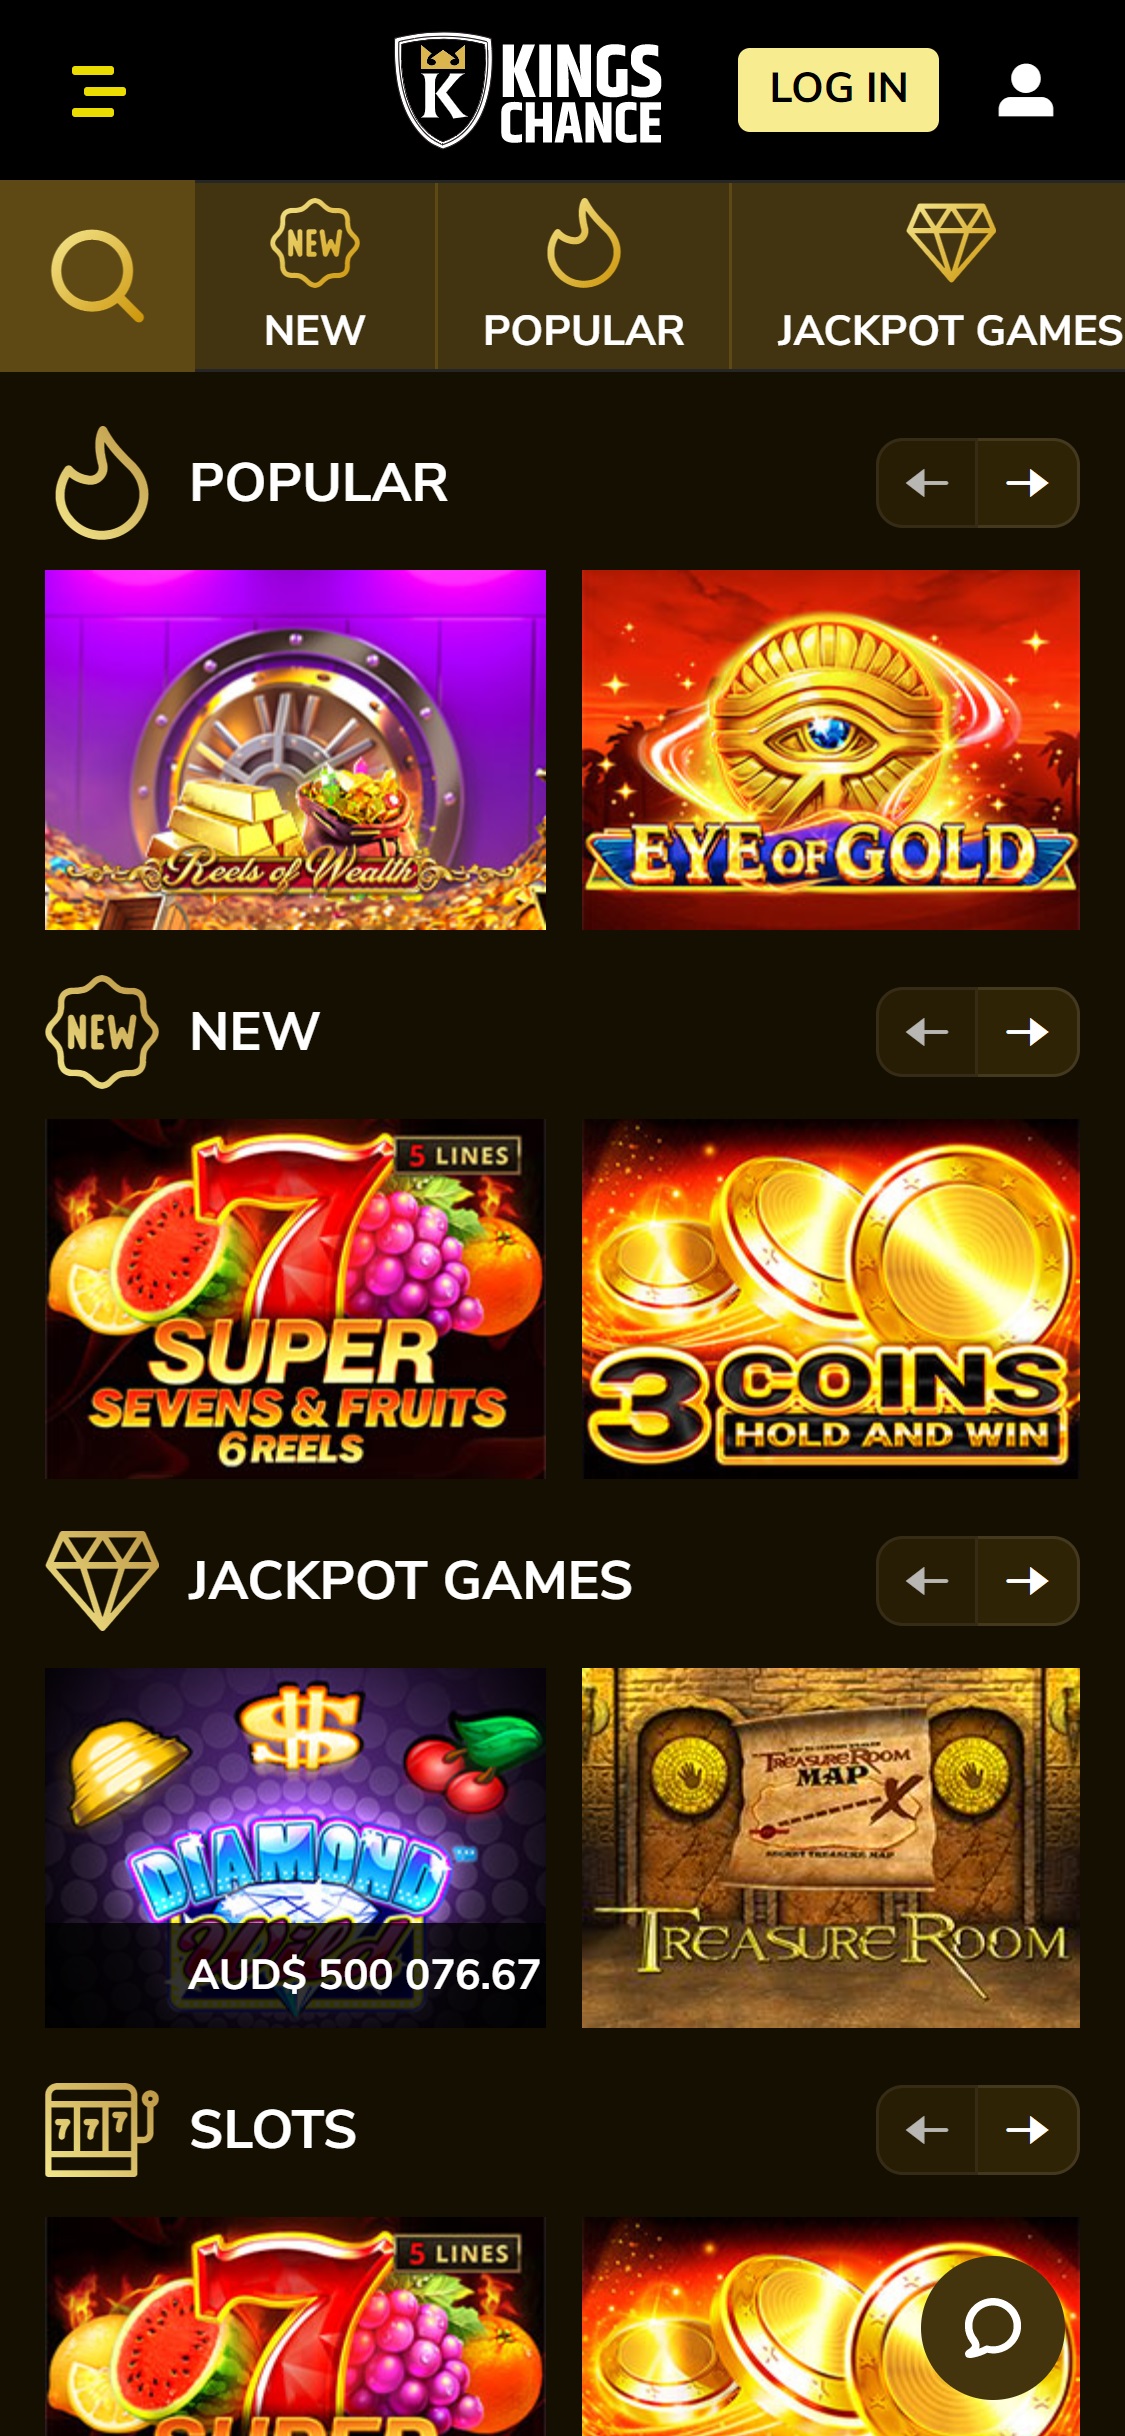 Kings Chance Casino Mobile Games Review